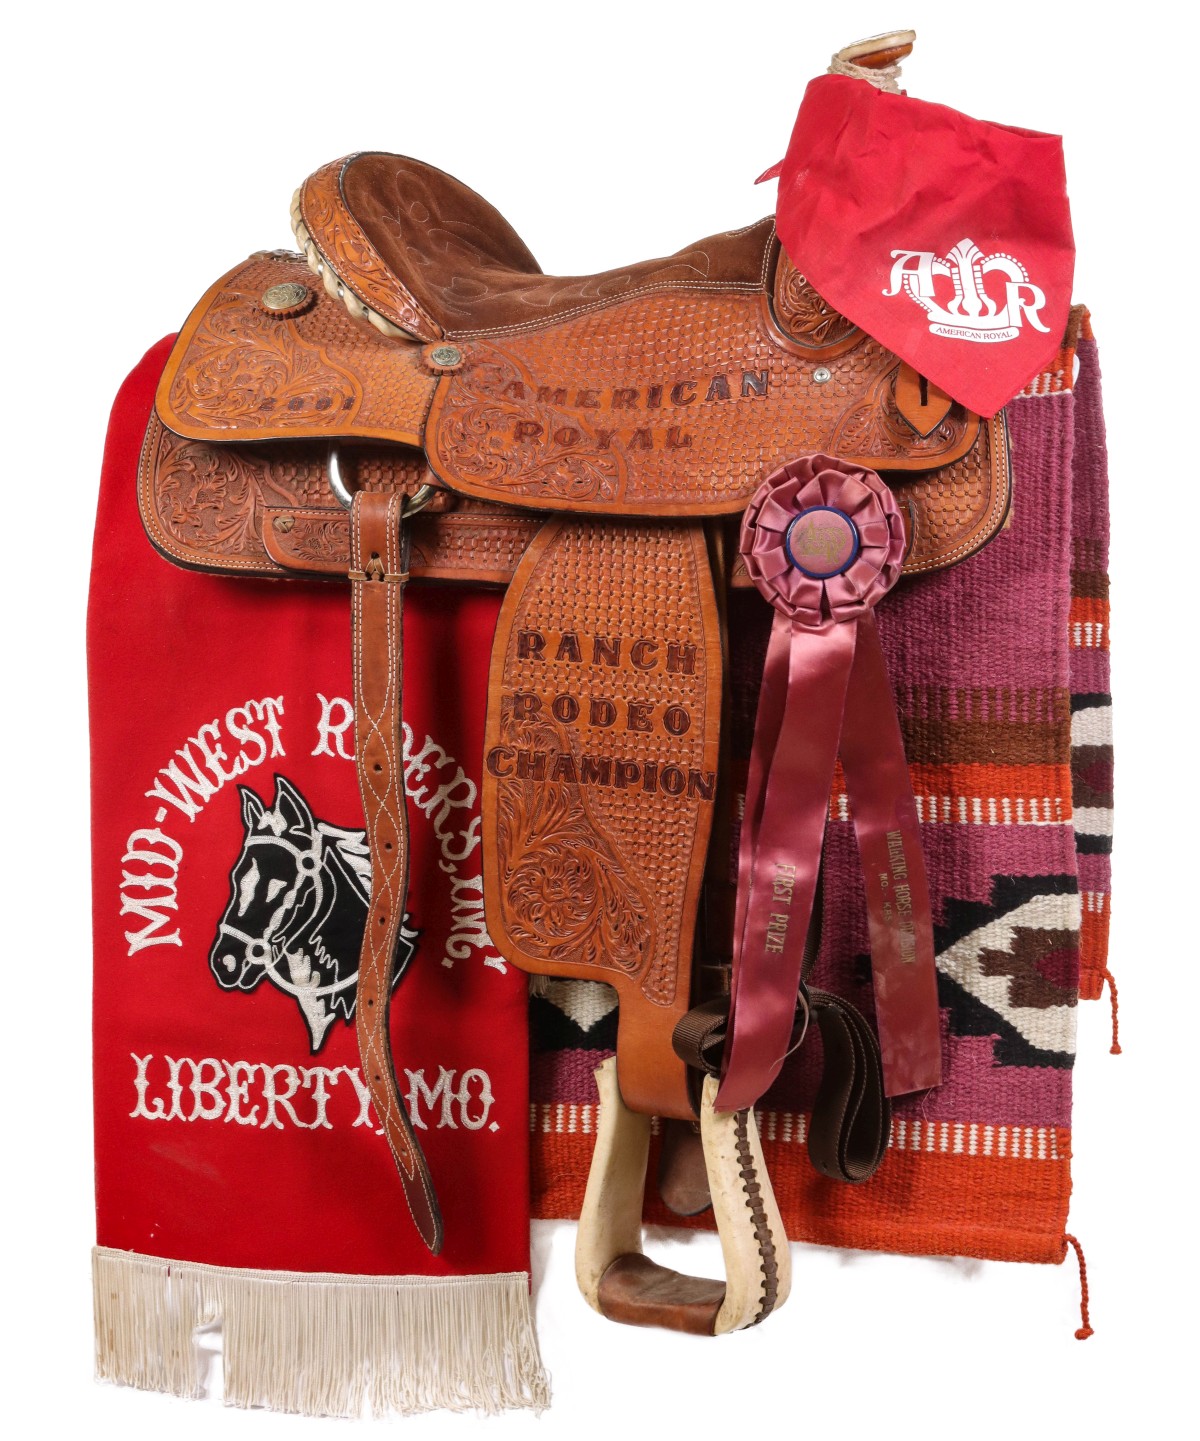 AMERICAN ROYAL 2001 RODEO CHAMPION SADDLE BY CORRIENTE